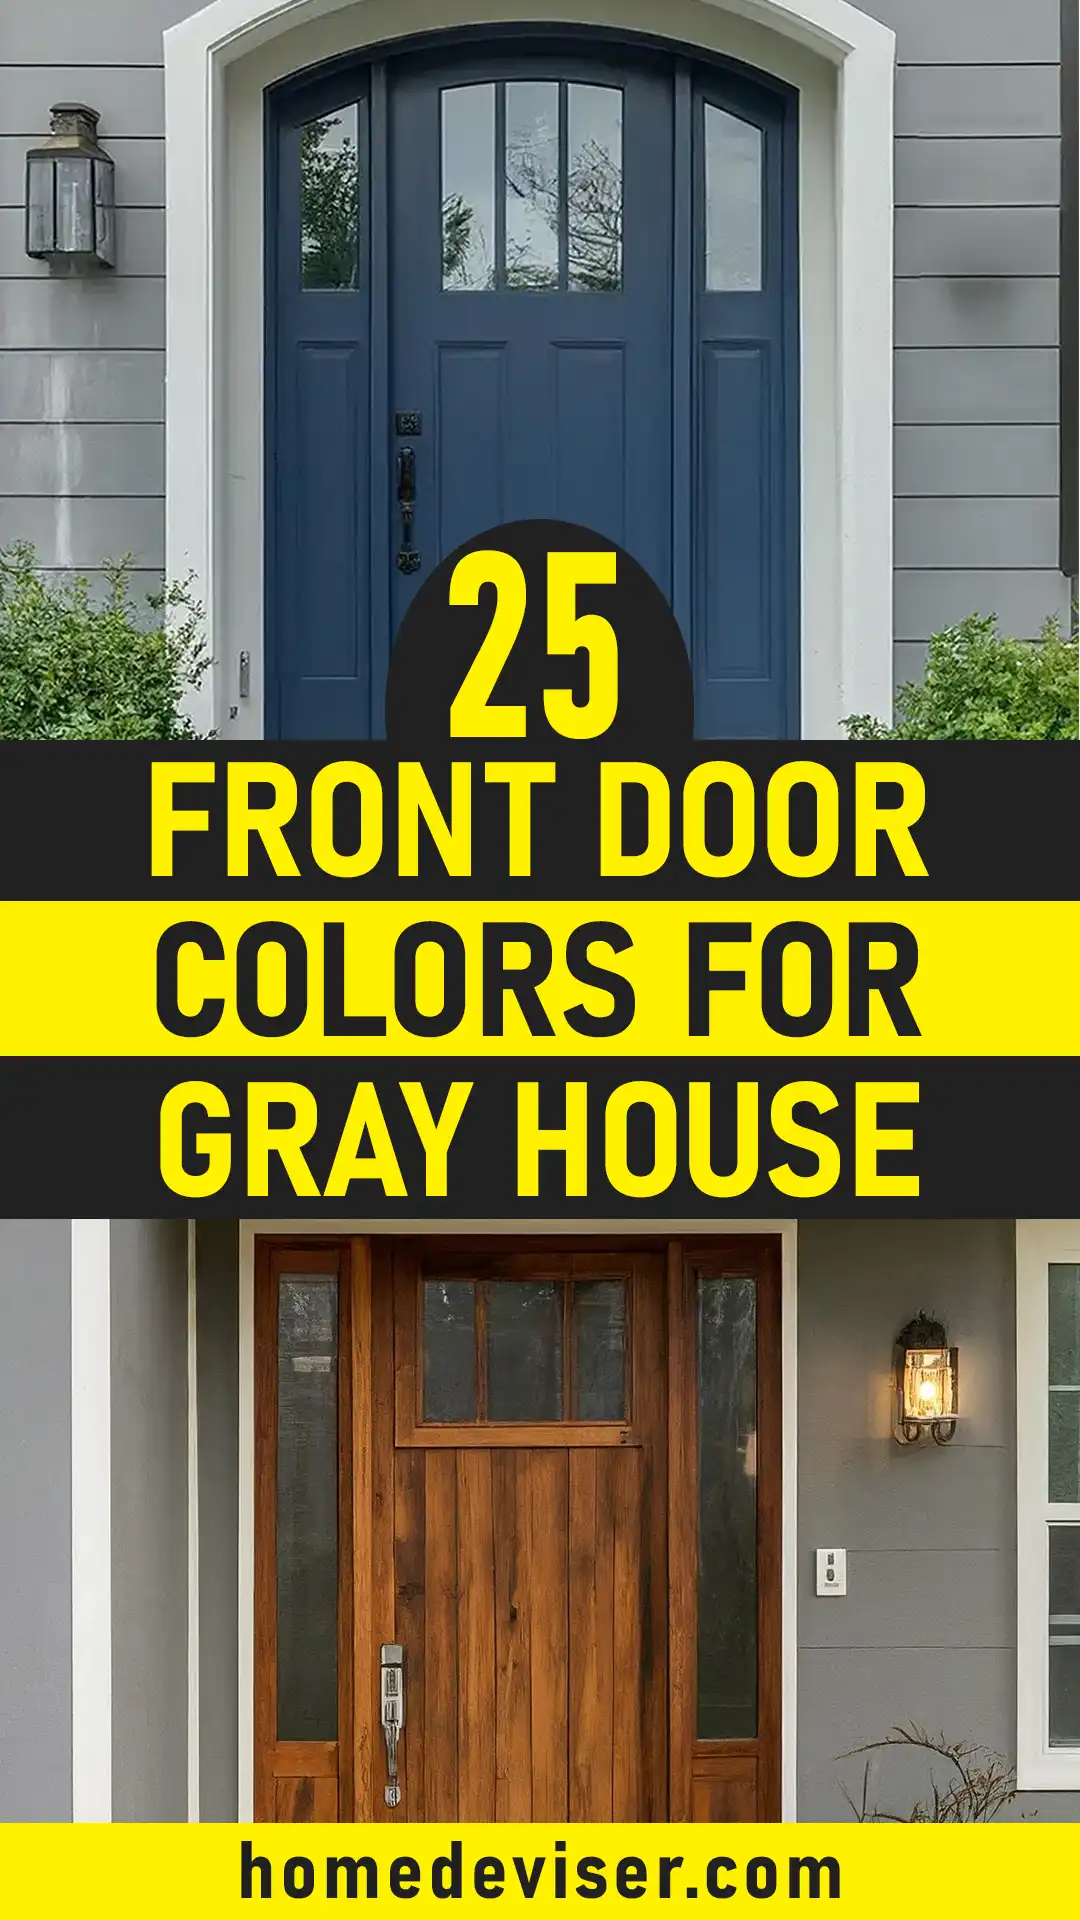 Front Door Colors for Gray House